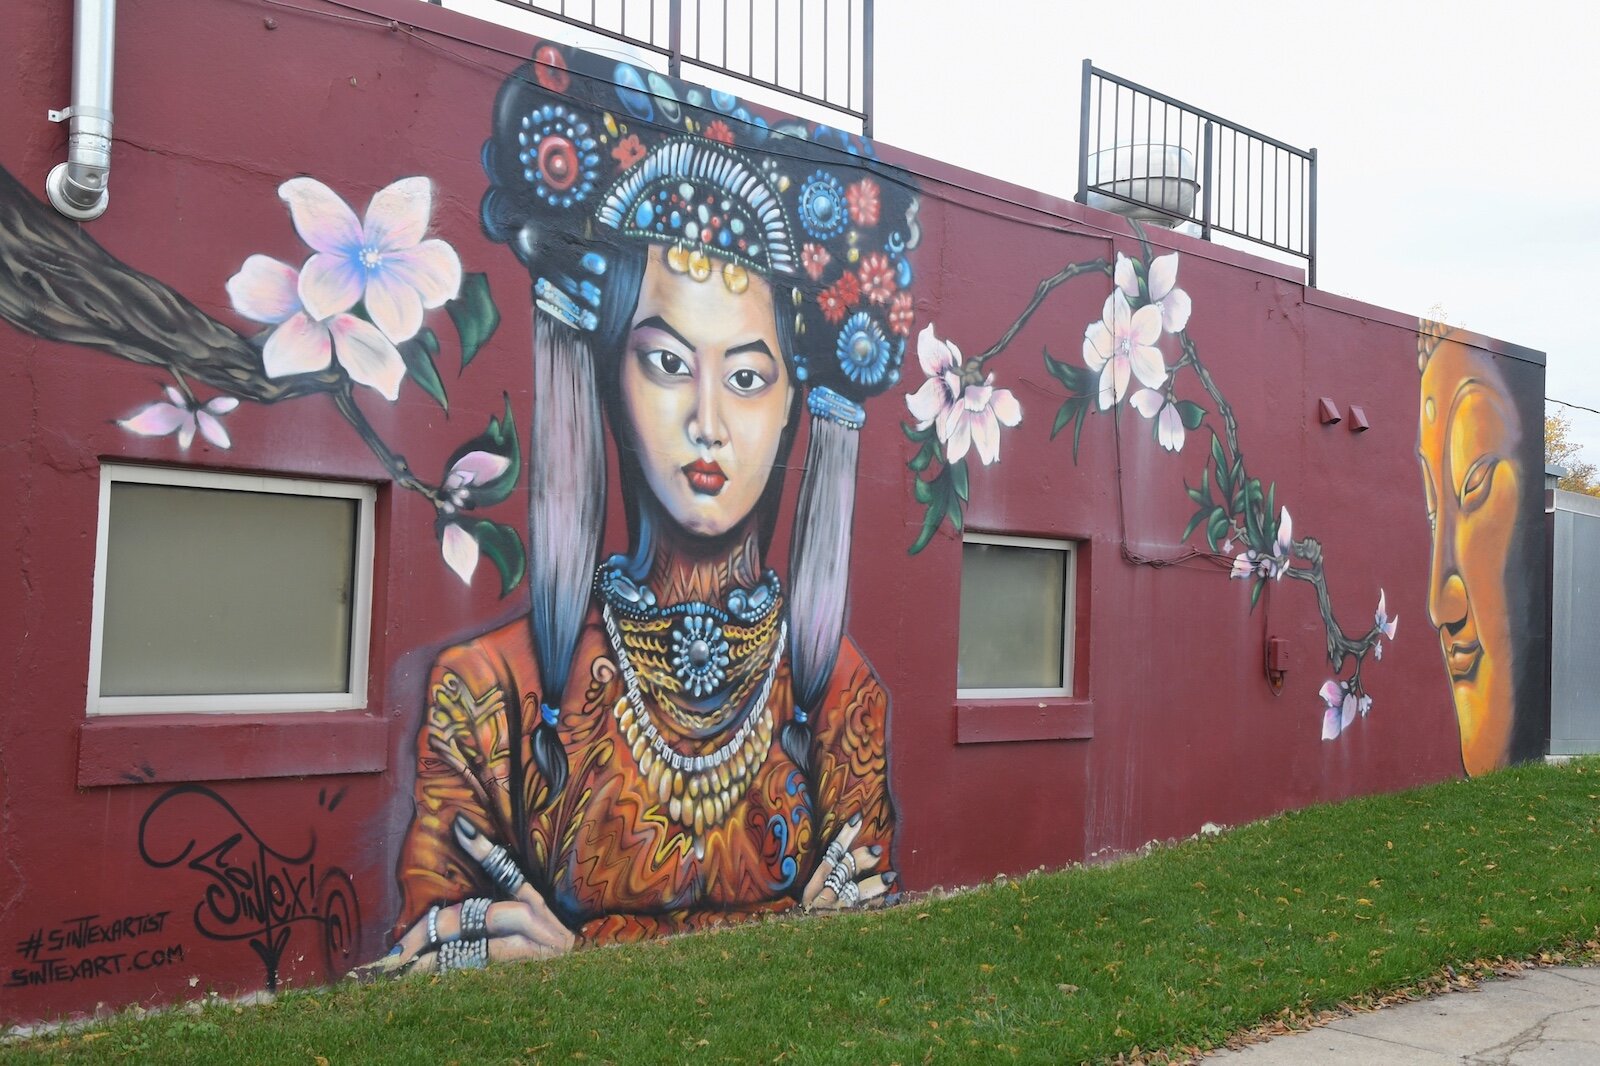 A mural on the outside of the building occupied by Ciao Bella Chocolat.